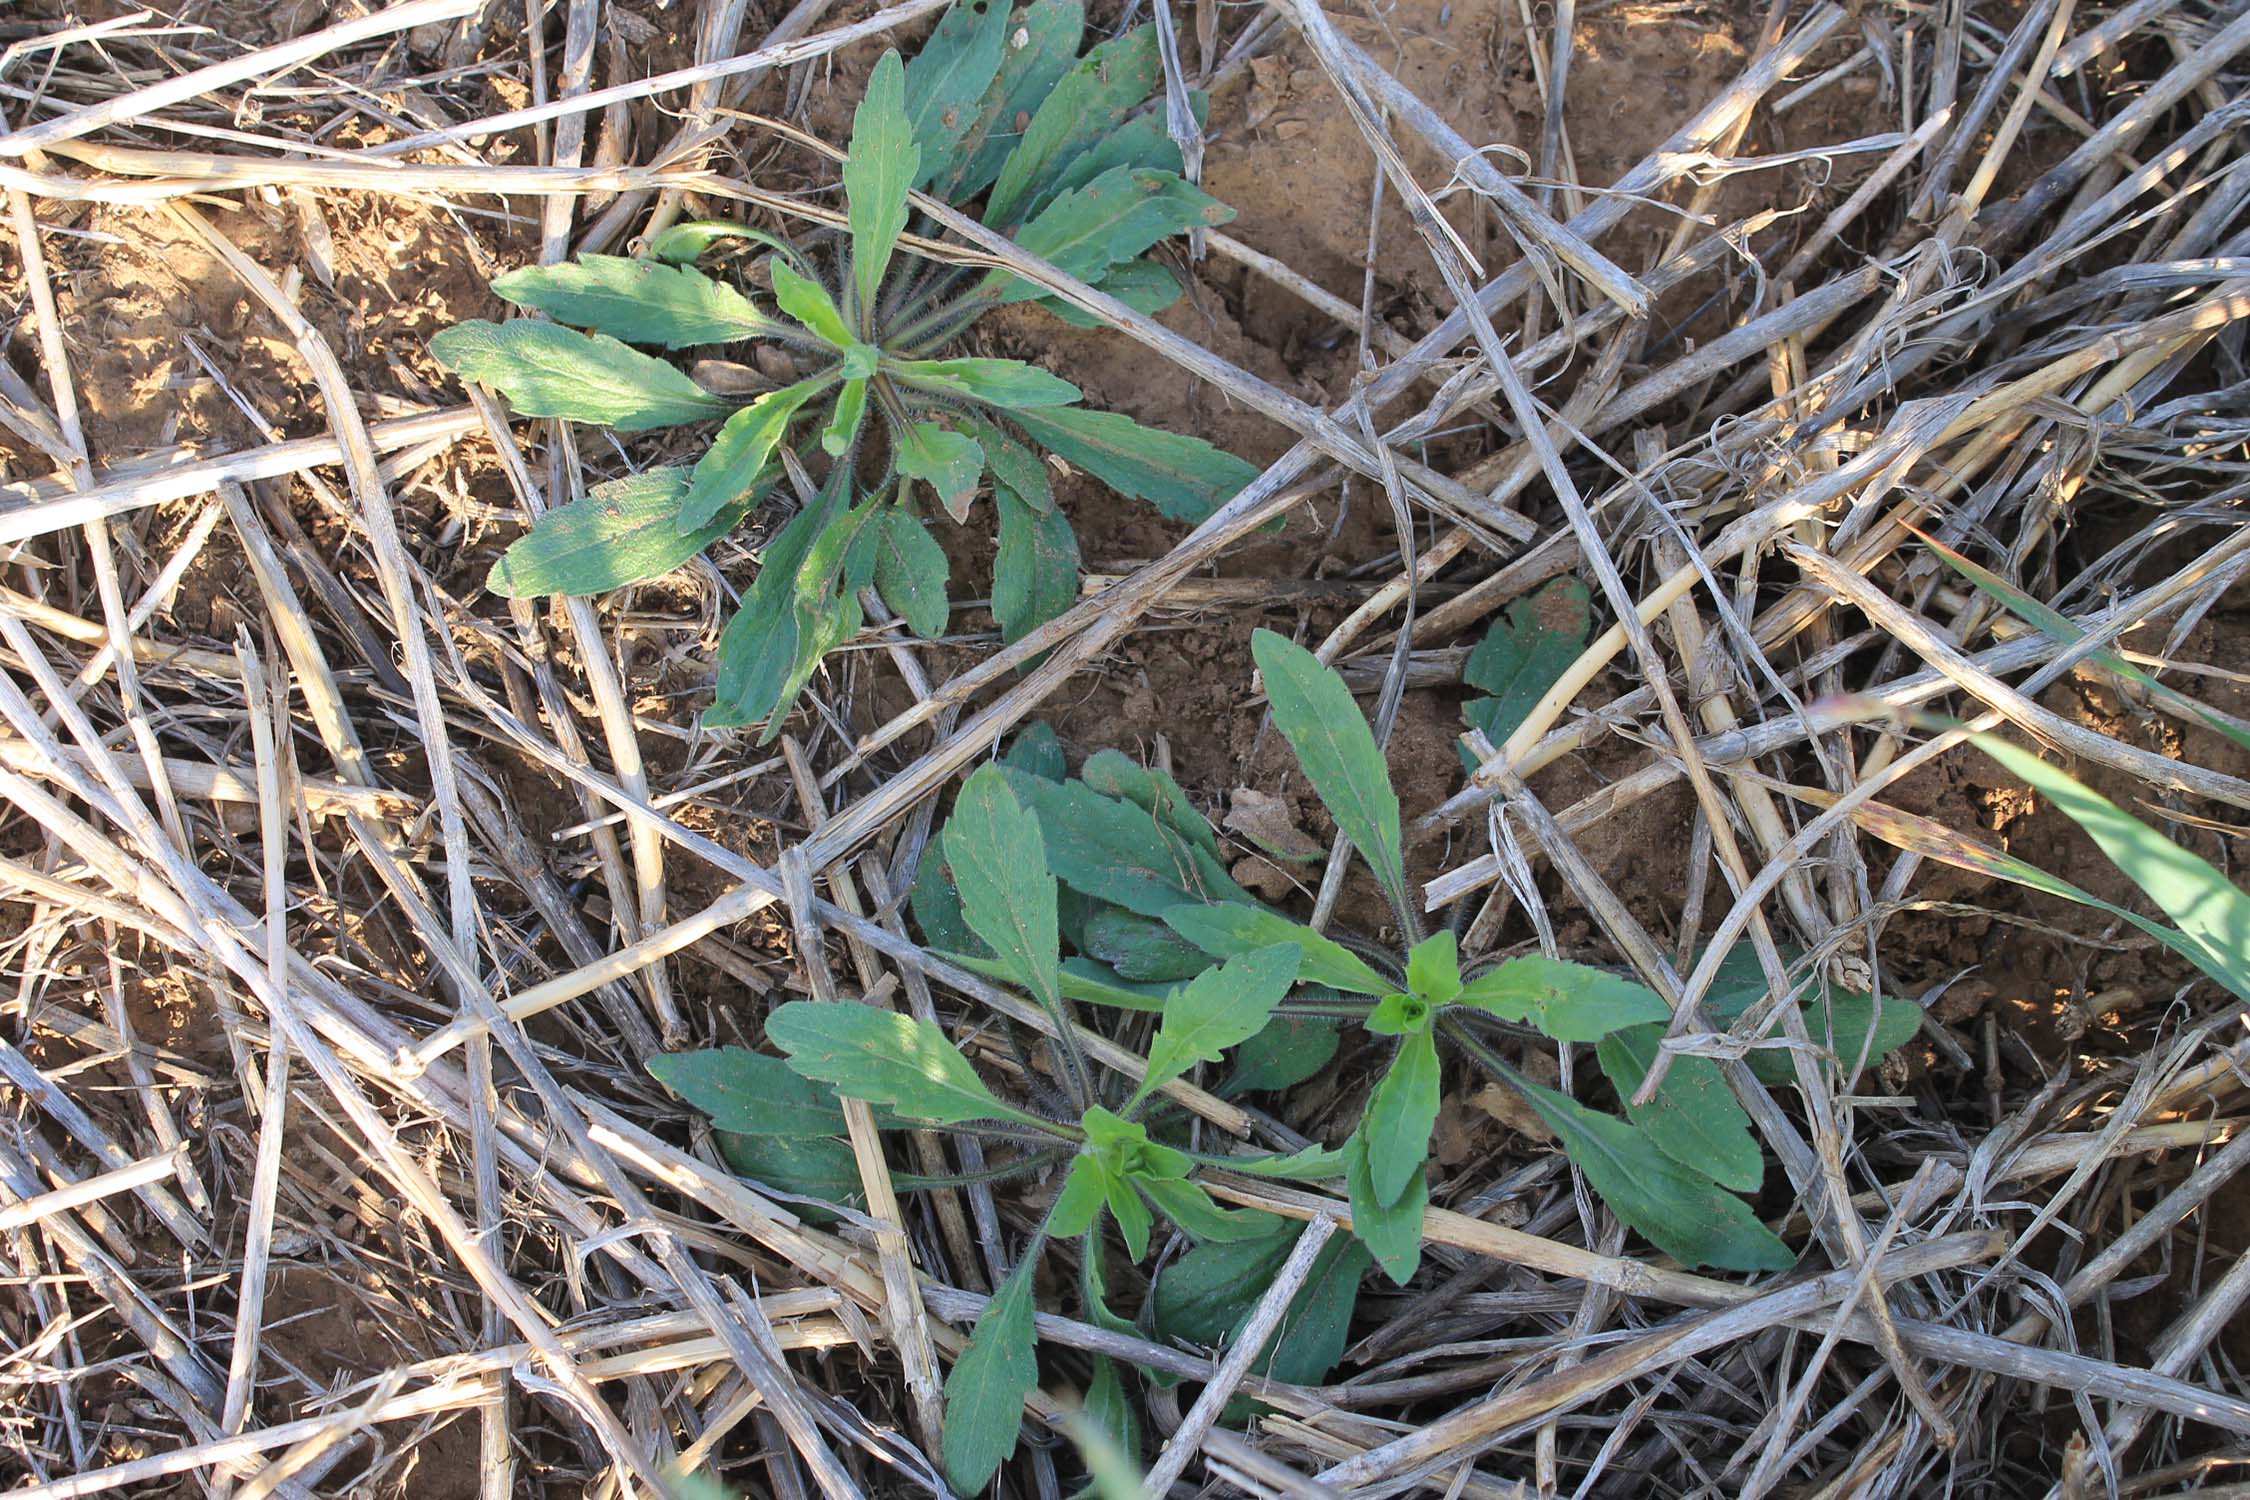 A horseweed plant with less lobed leaves.